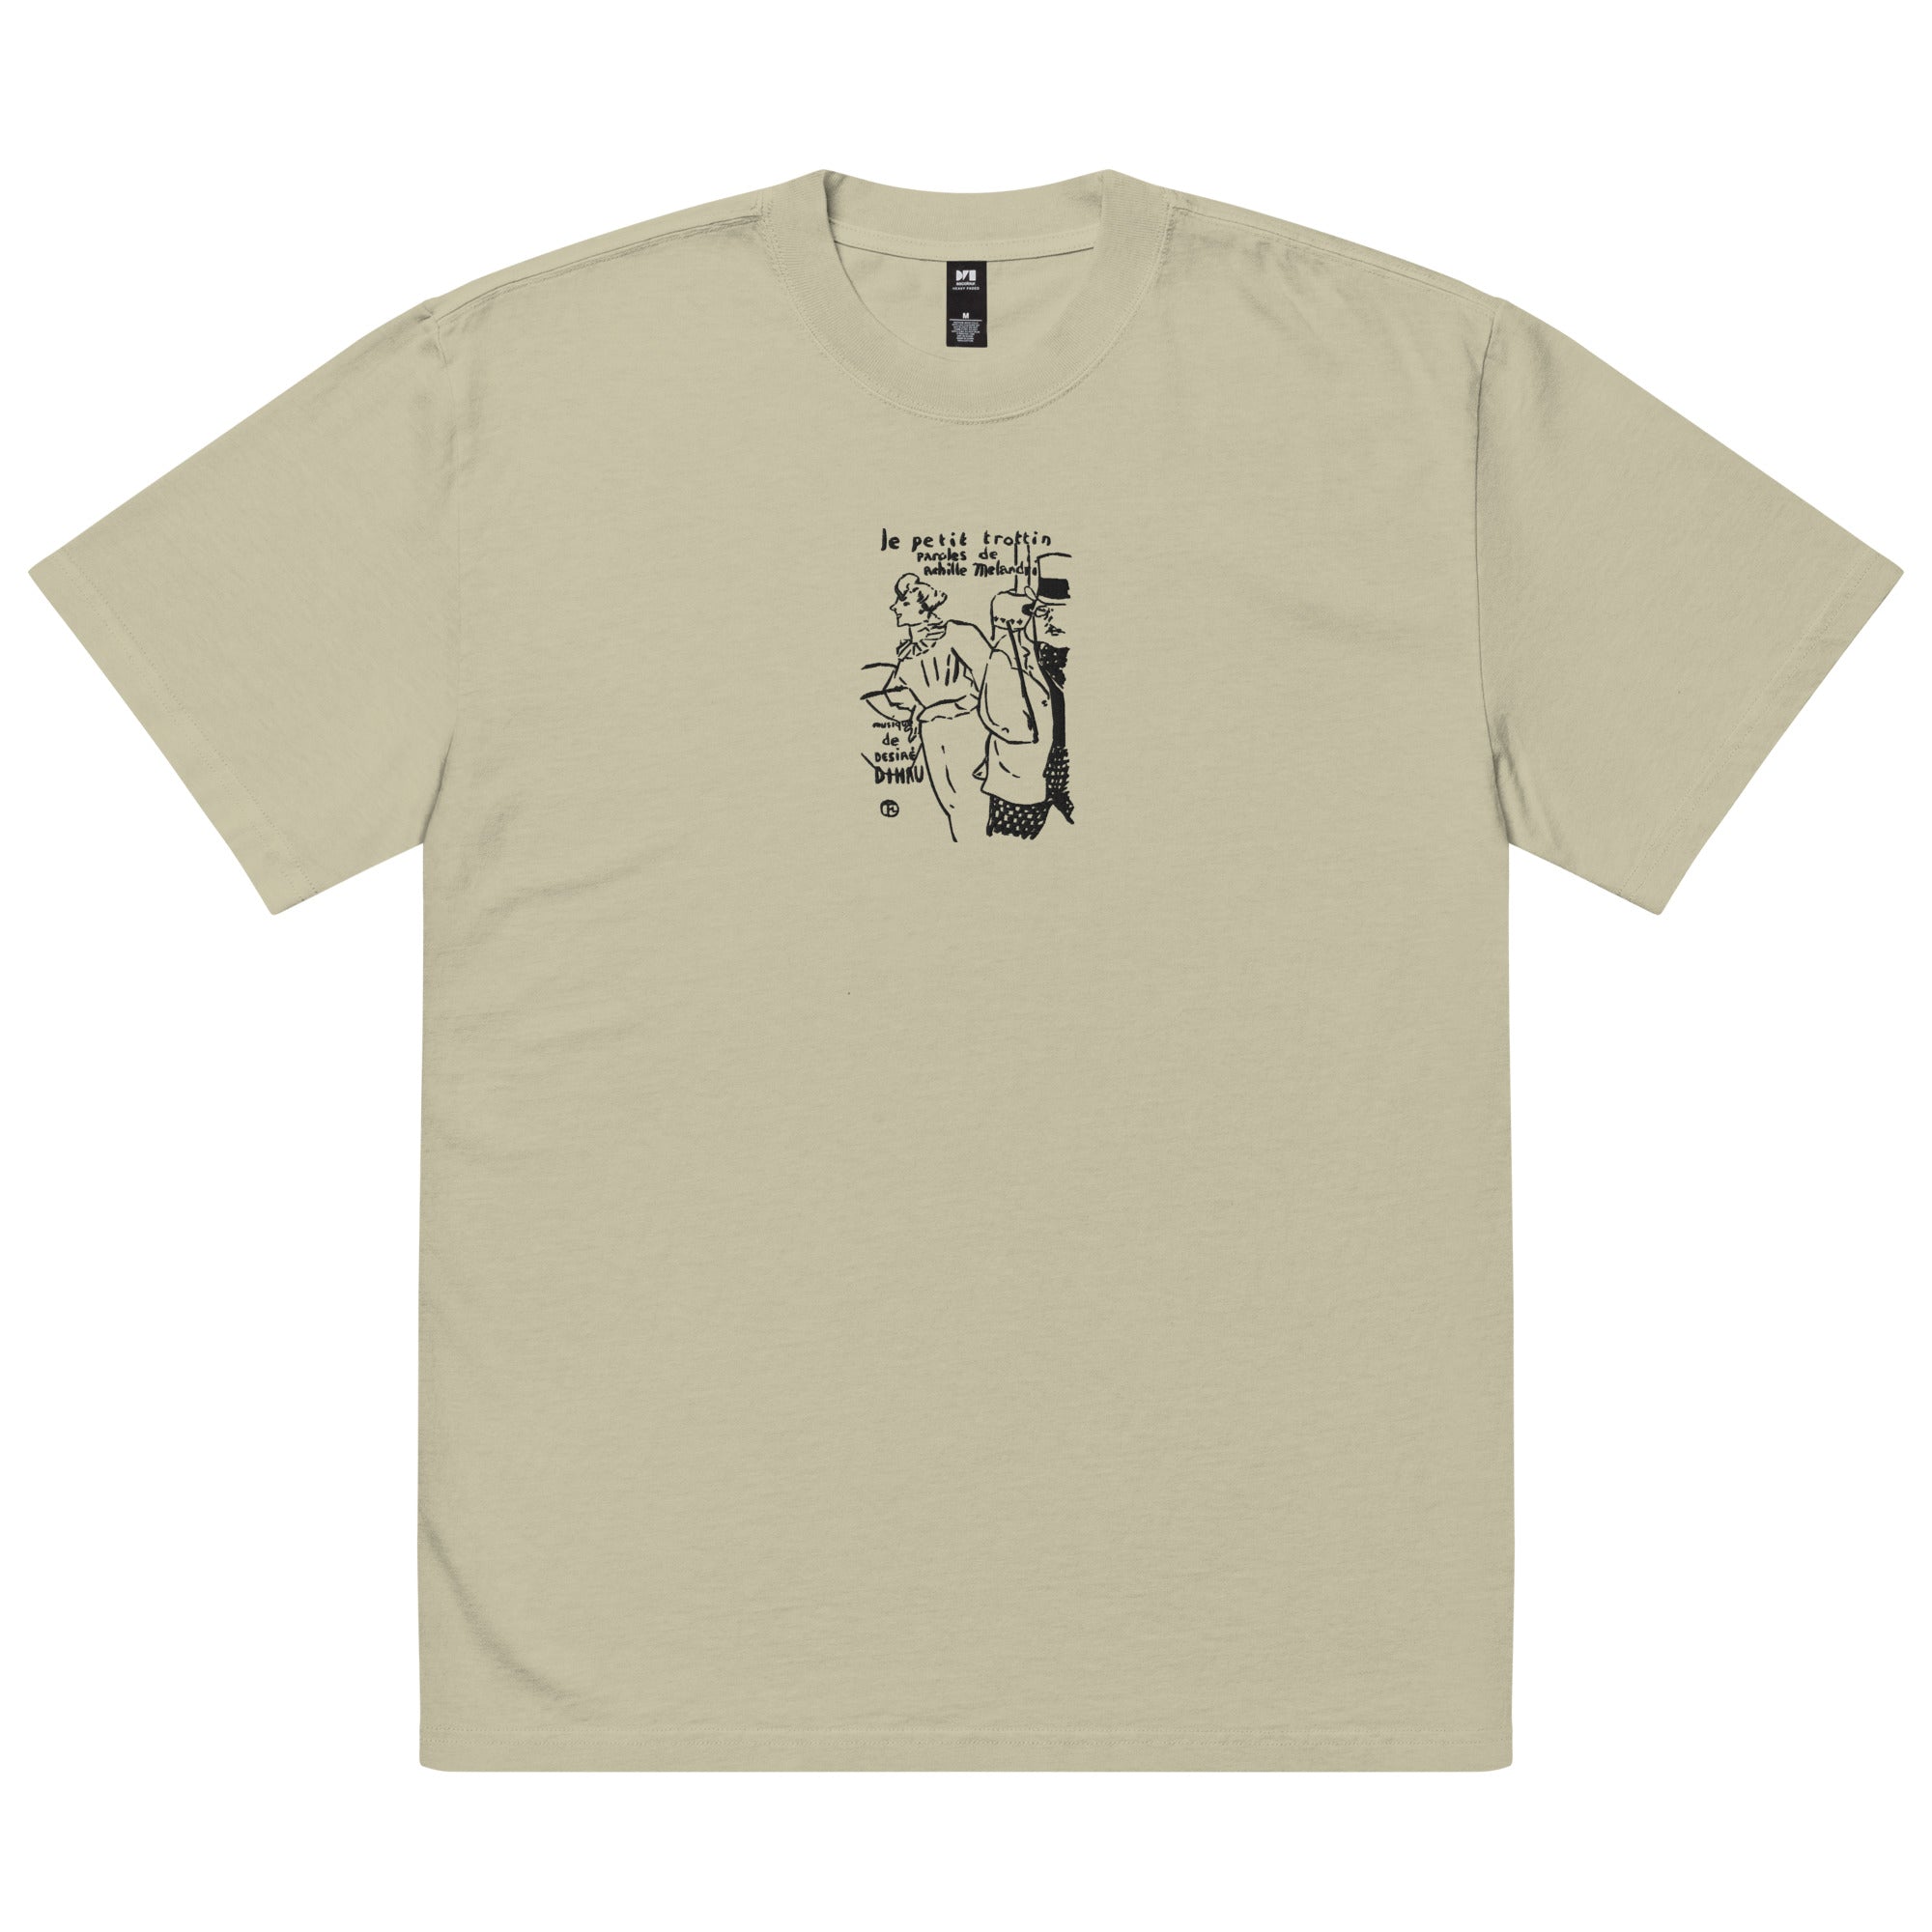 Embroidered, oversized, faded t-shirt. Little Errand Girl. Toulouse-Lautrec.